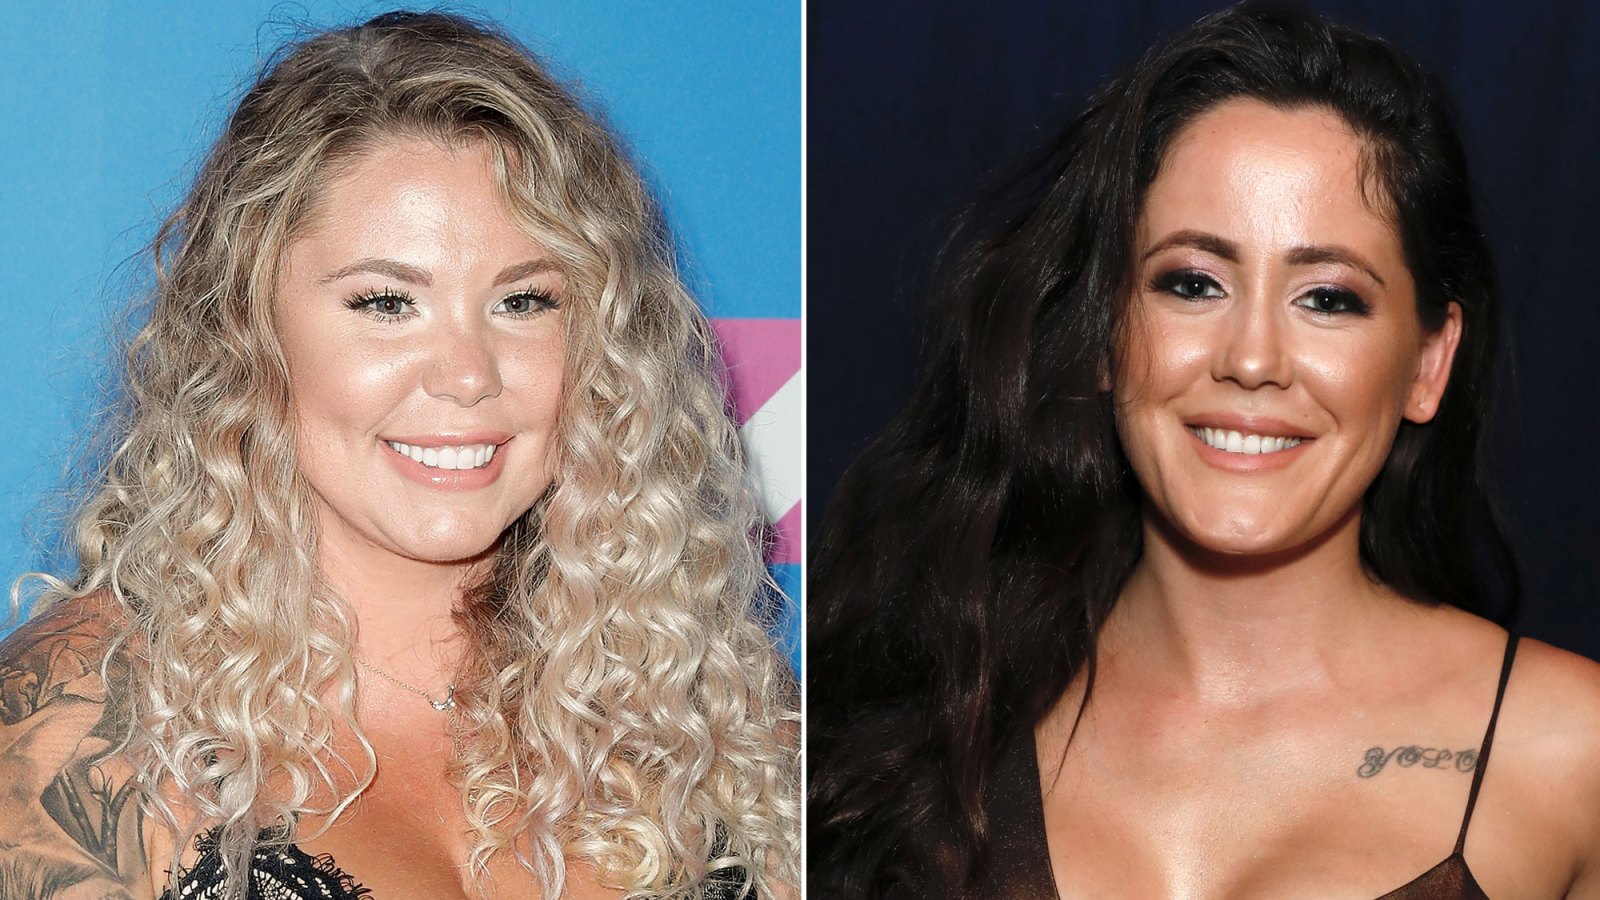 Kailyn Lowry Wants Jenelle Evans to Appear on Her Podcast Amid Divorce From David Eason